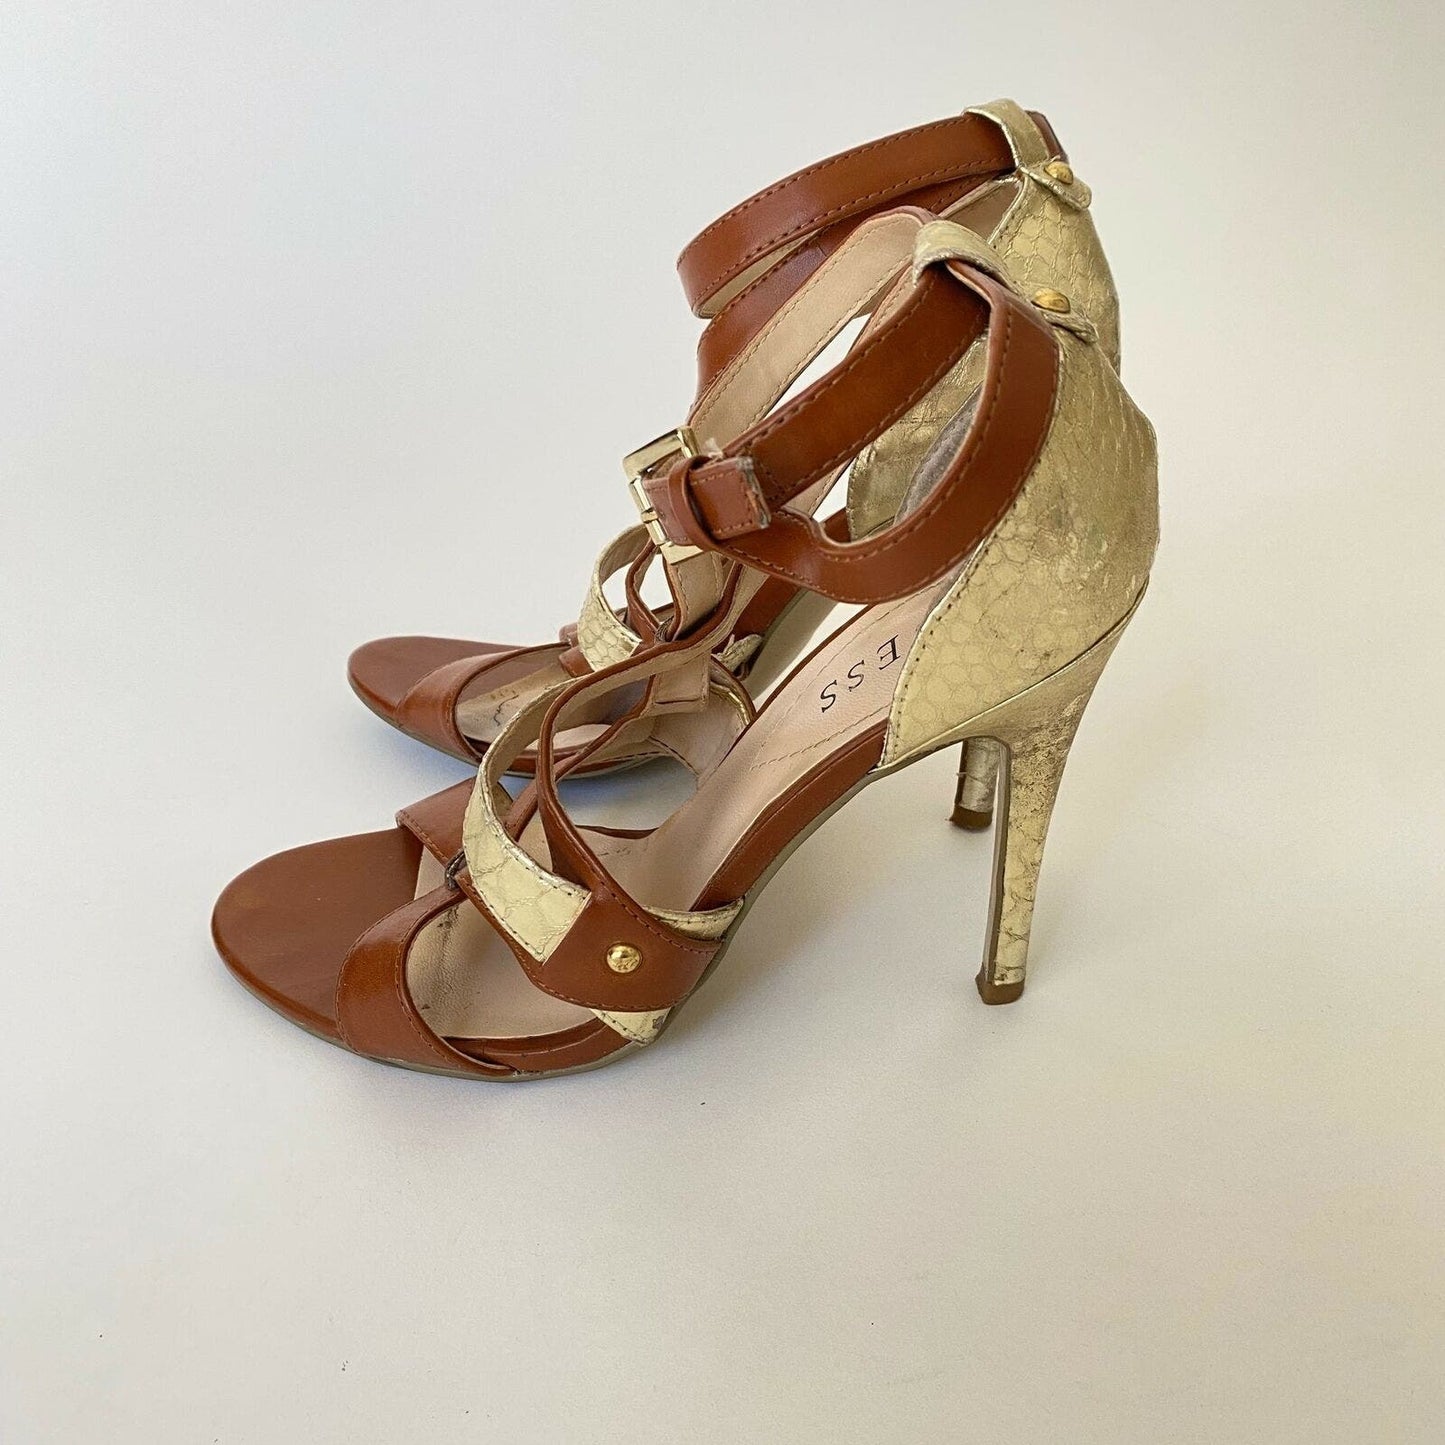 Guess sz 8 strappy ankle formal or casual heels